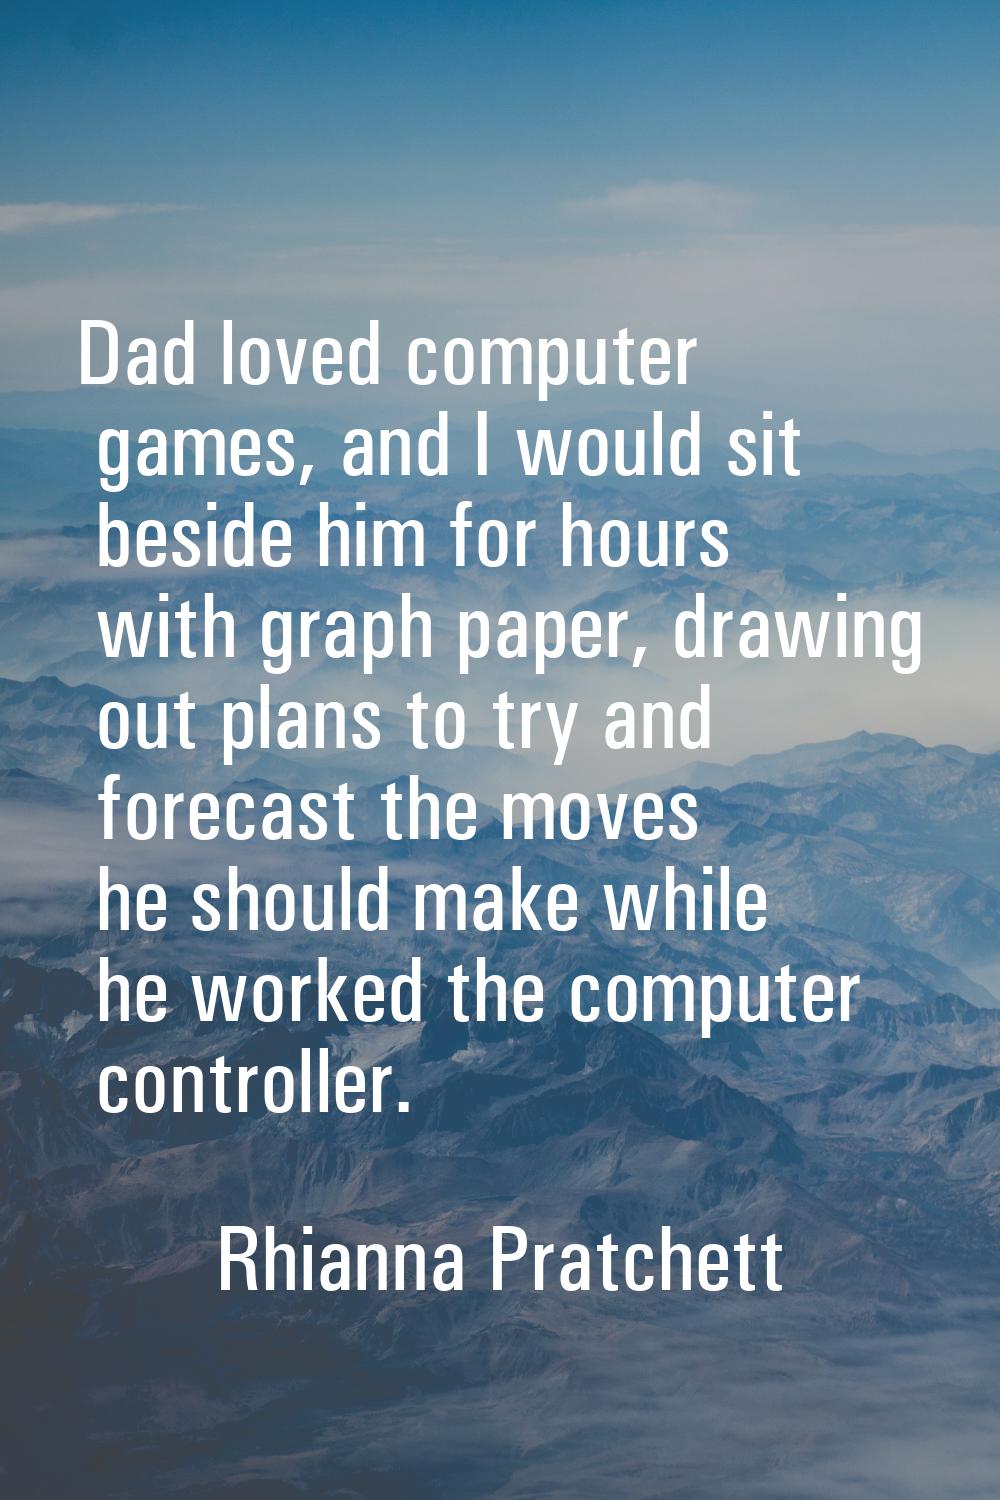 Dad loved computer games, and I would sit beside him for hours with graph paper, drawing out plans 